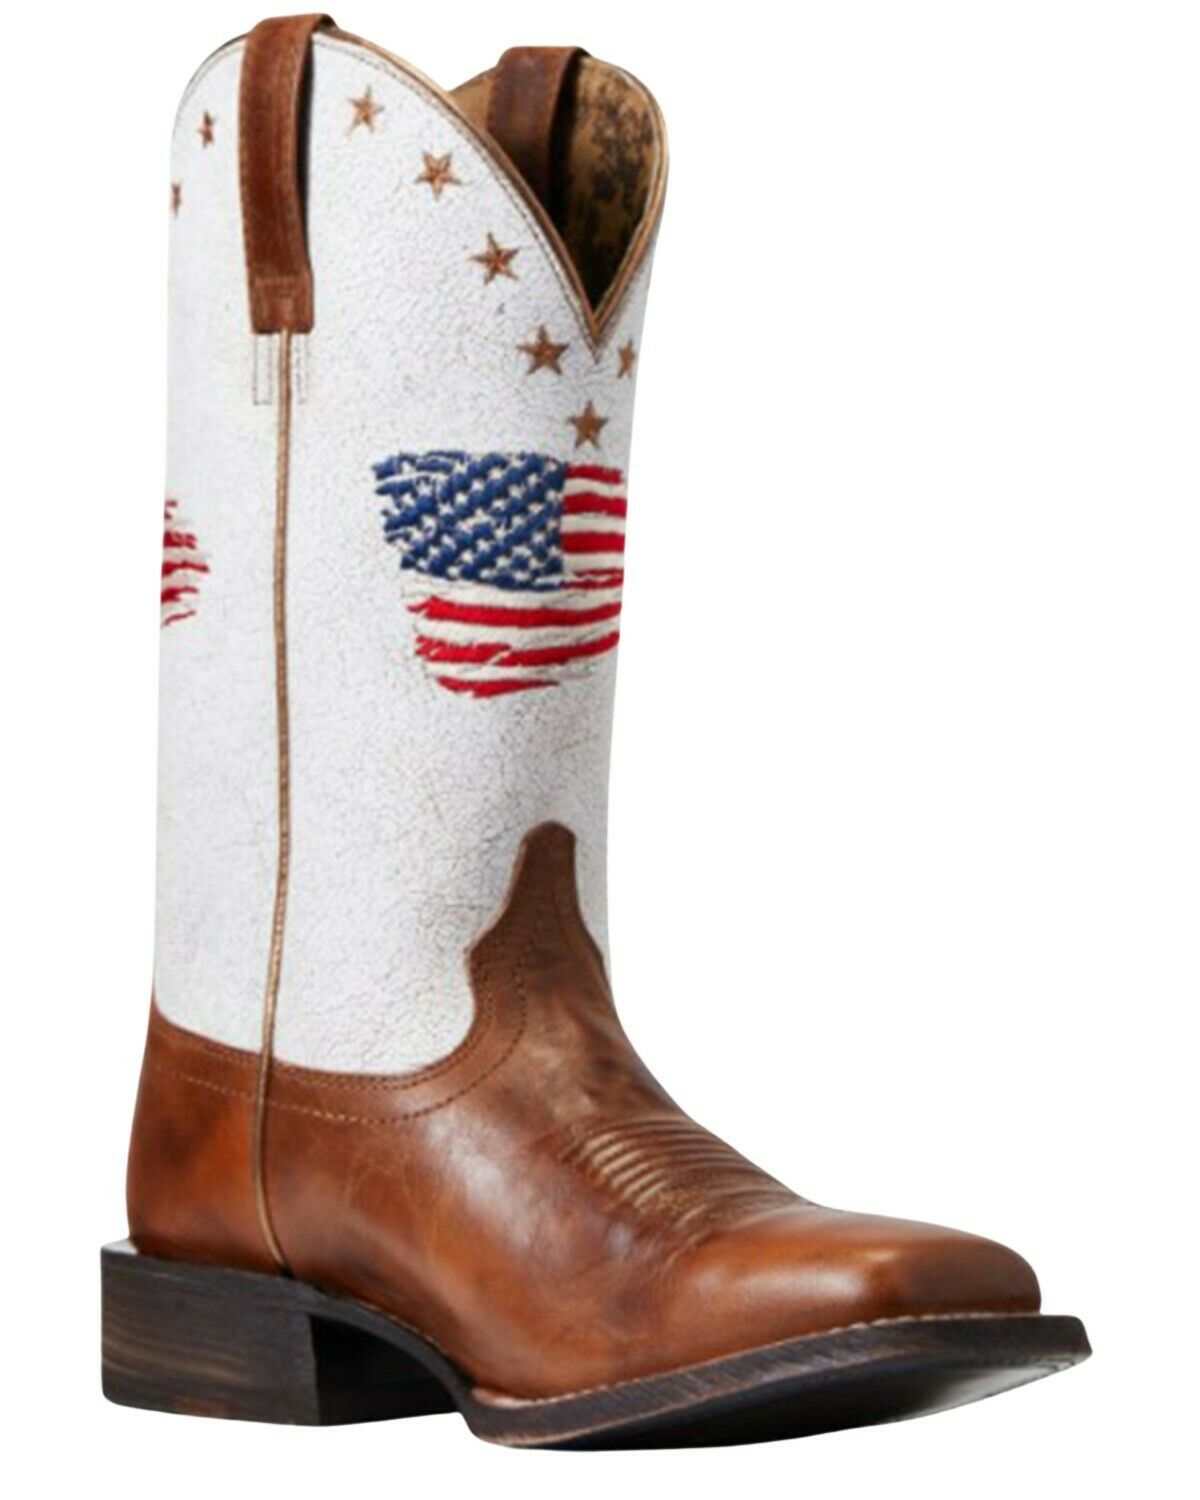 Ariat Women's Women's Patriot Crackled American Flag Western Boot -10040400